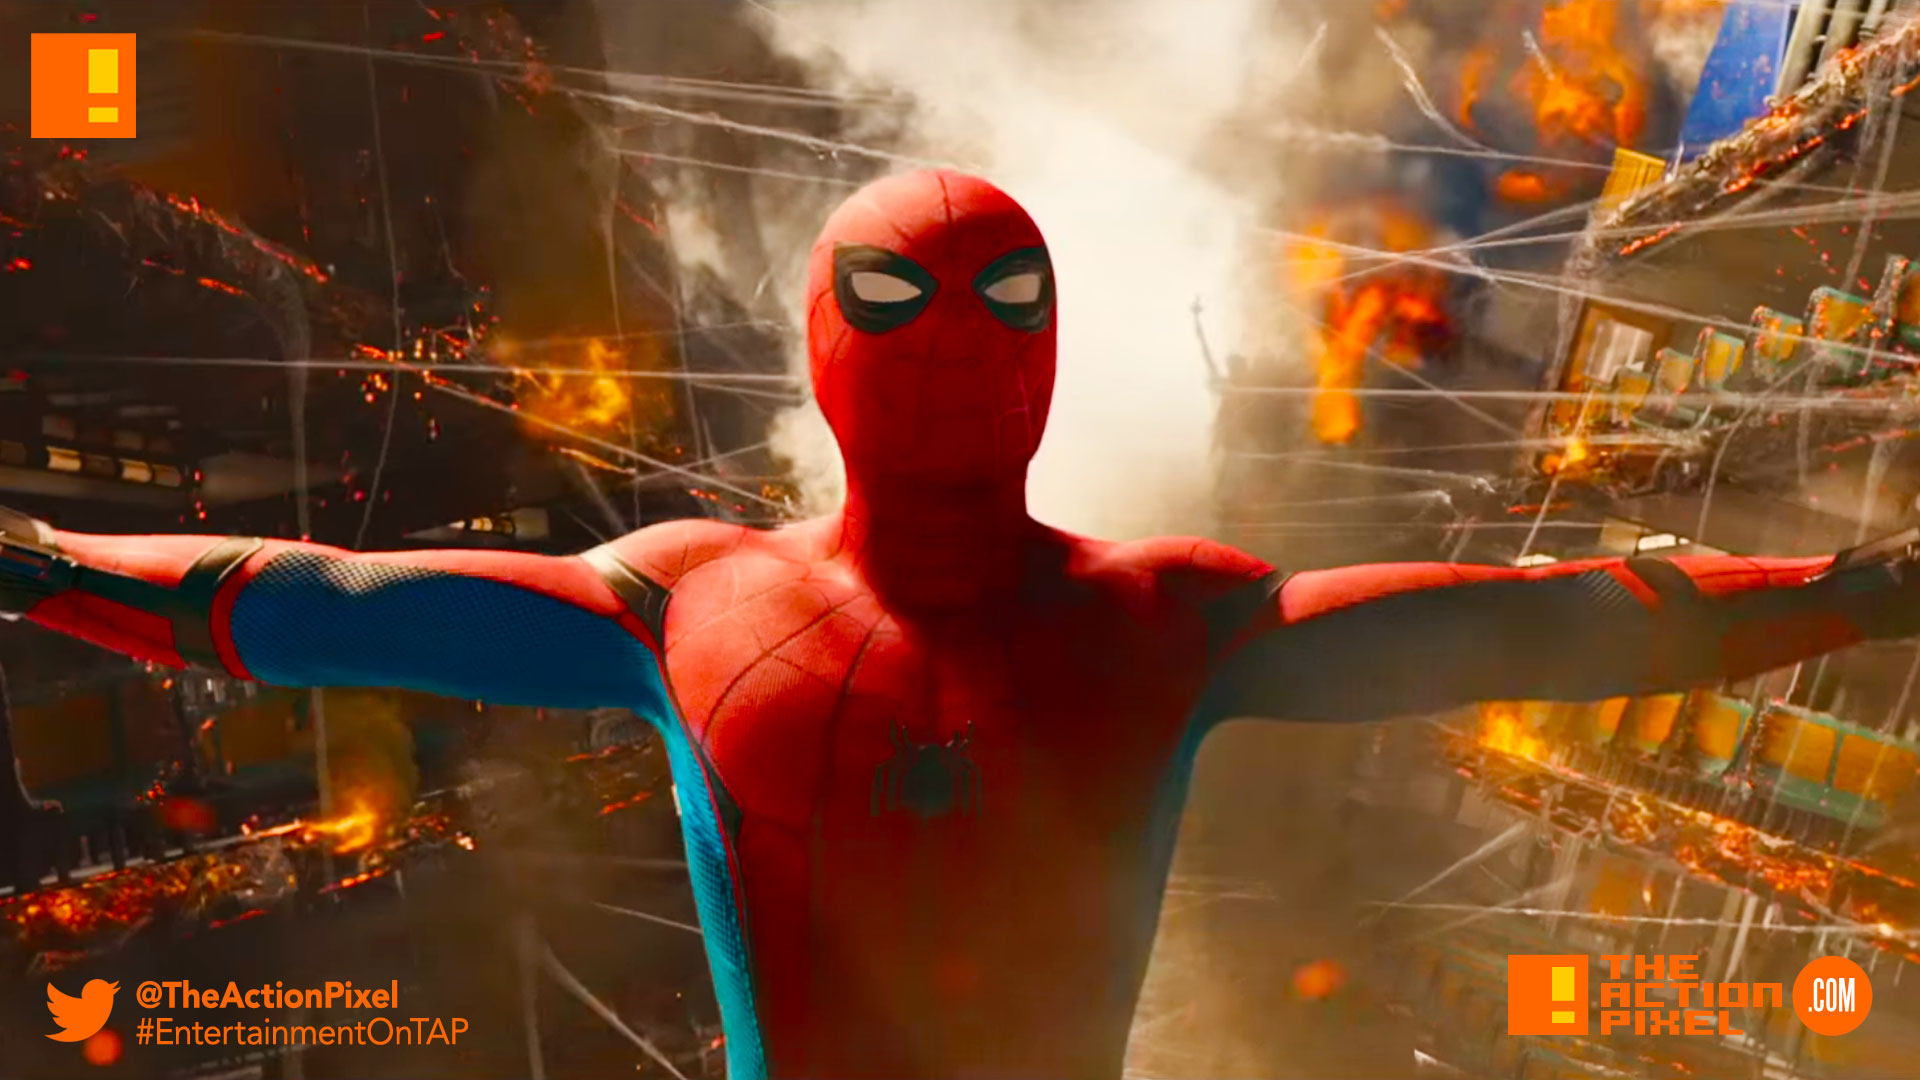 spiderman, poster spider-man: homecoming, spider-man, spiderman, homecoming, marvel, marvel comics, disney, marvel studios, sony, the action pixel, entertainment on tap, tom holland, spider-man, peter parker, spidey, new york, teaser, trailer,